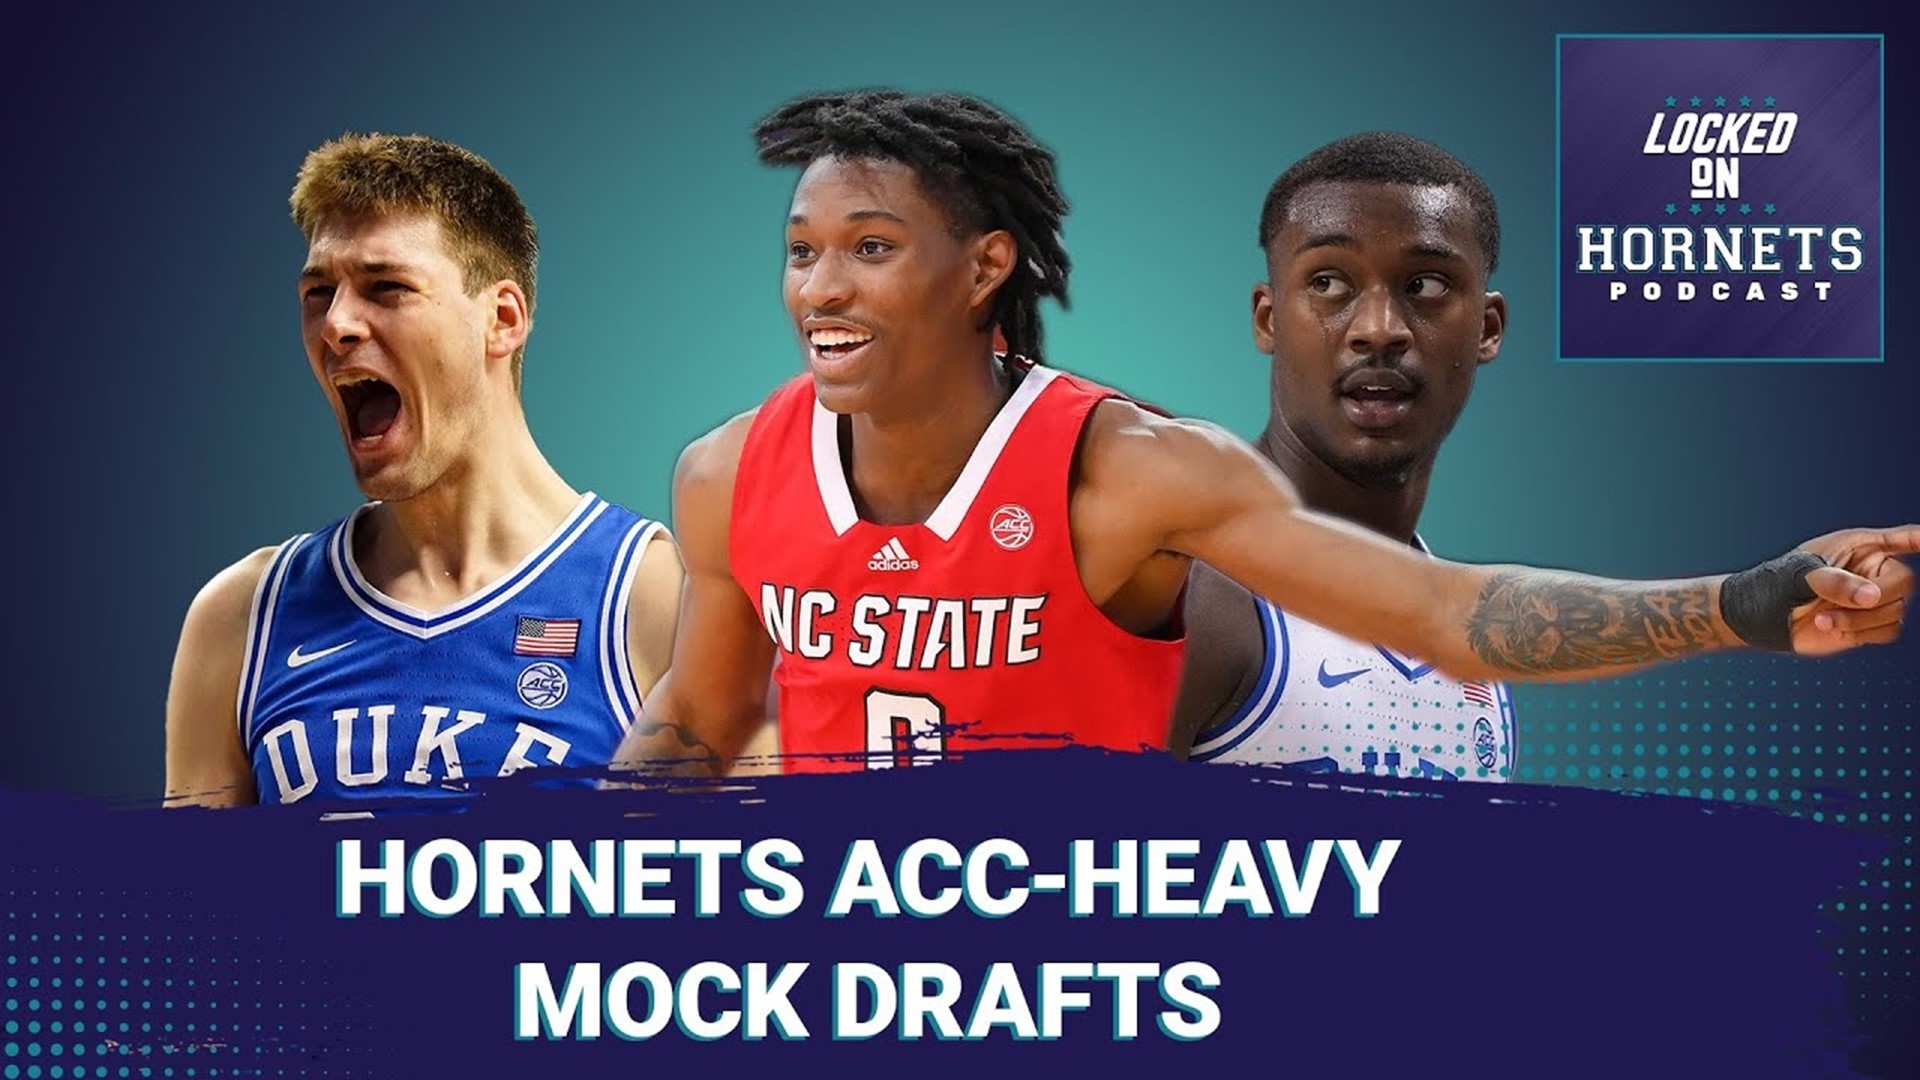 David Walker makes his weekly appearance to discuss ACC players the Hornets should keep an eye on during the NCAA Tournament.